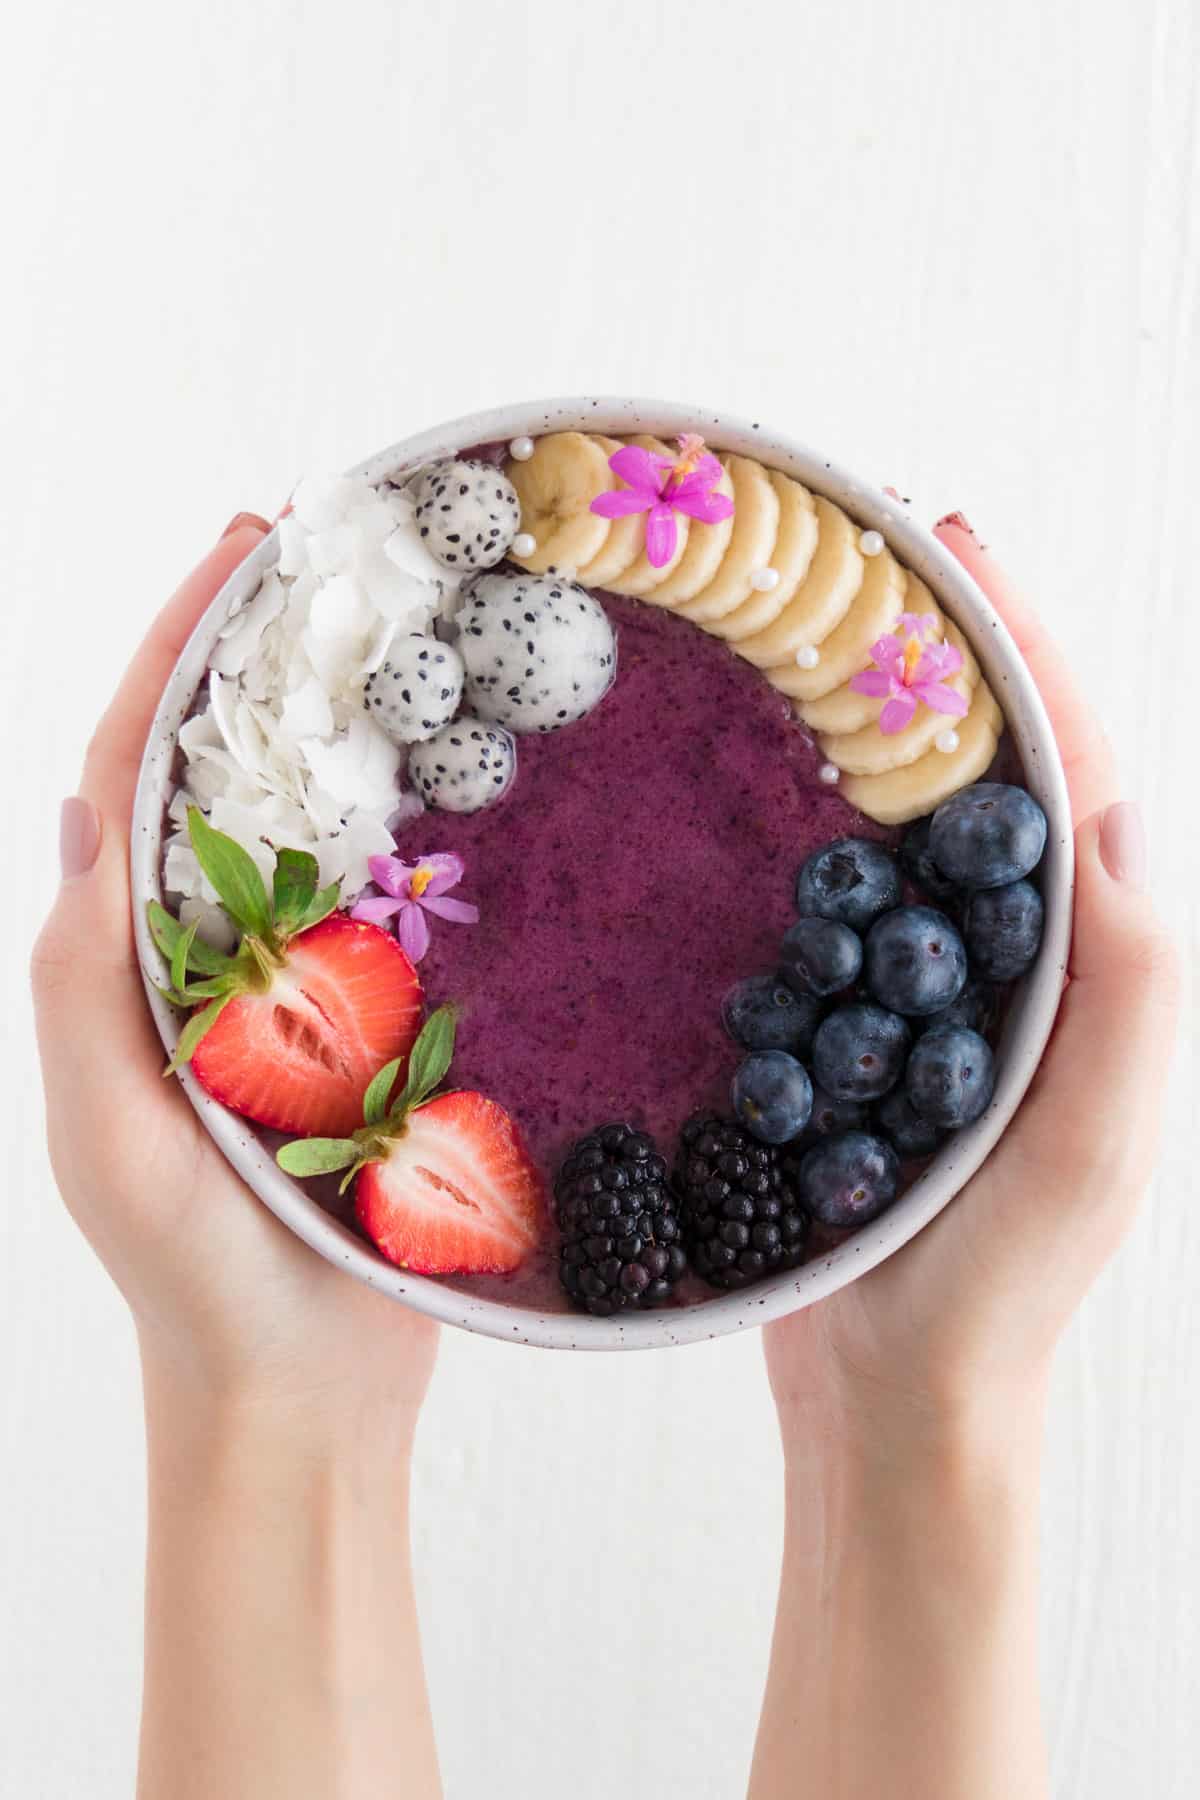 two hands holding an acai bowl